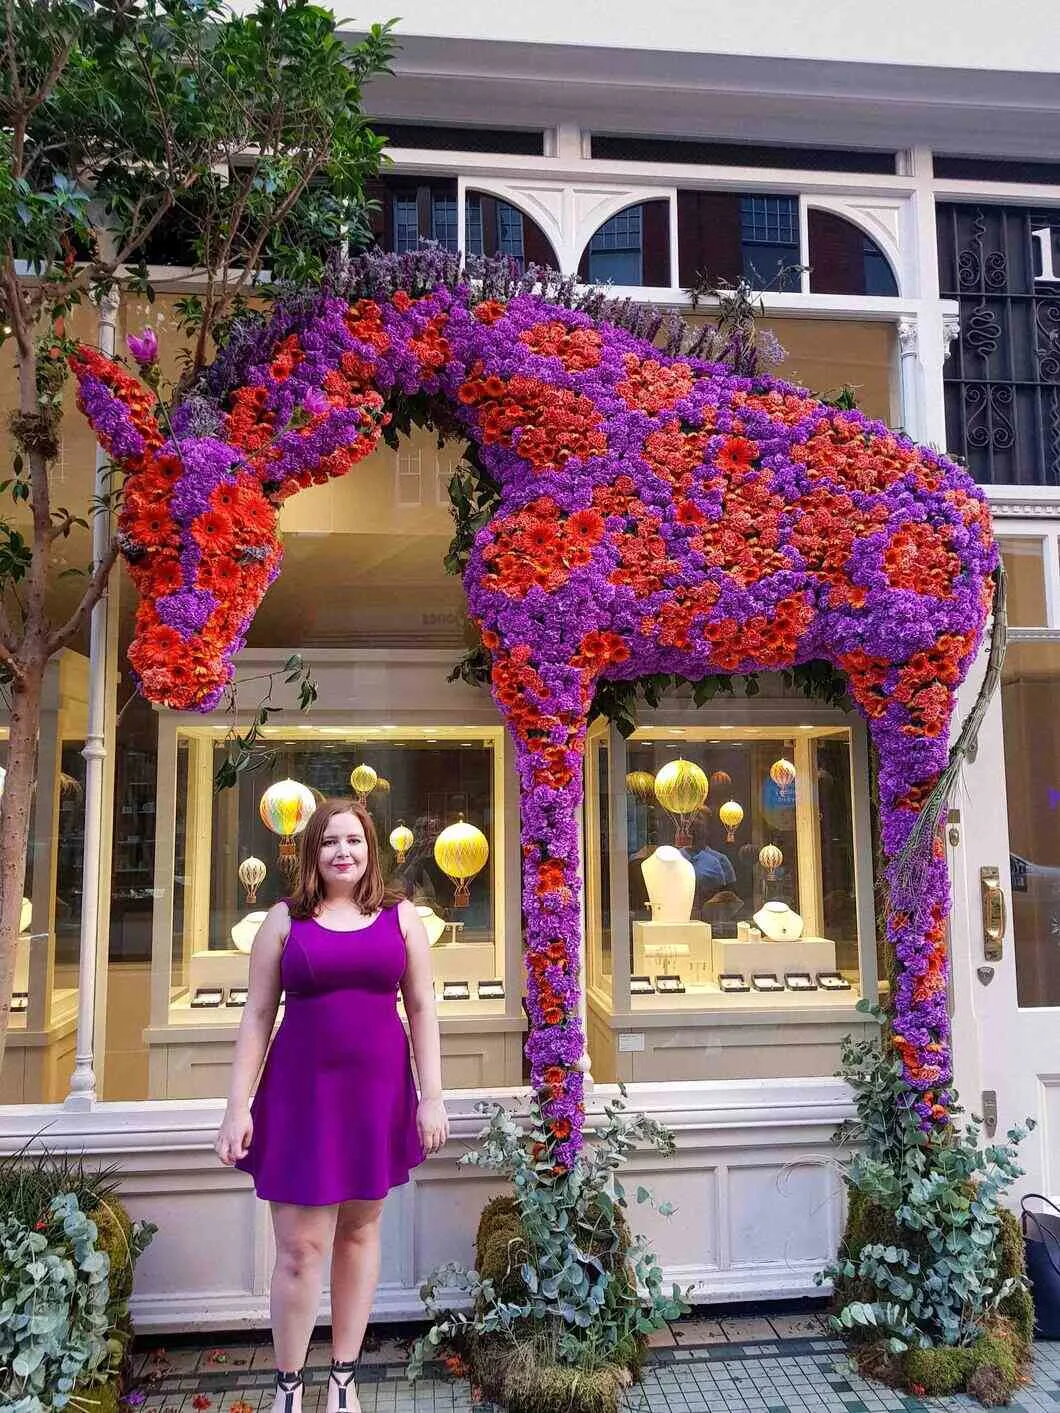 Chelsea in Bloom is a wonderful time to walk around seeing all the shops decked out in flower displays. 